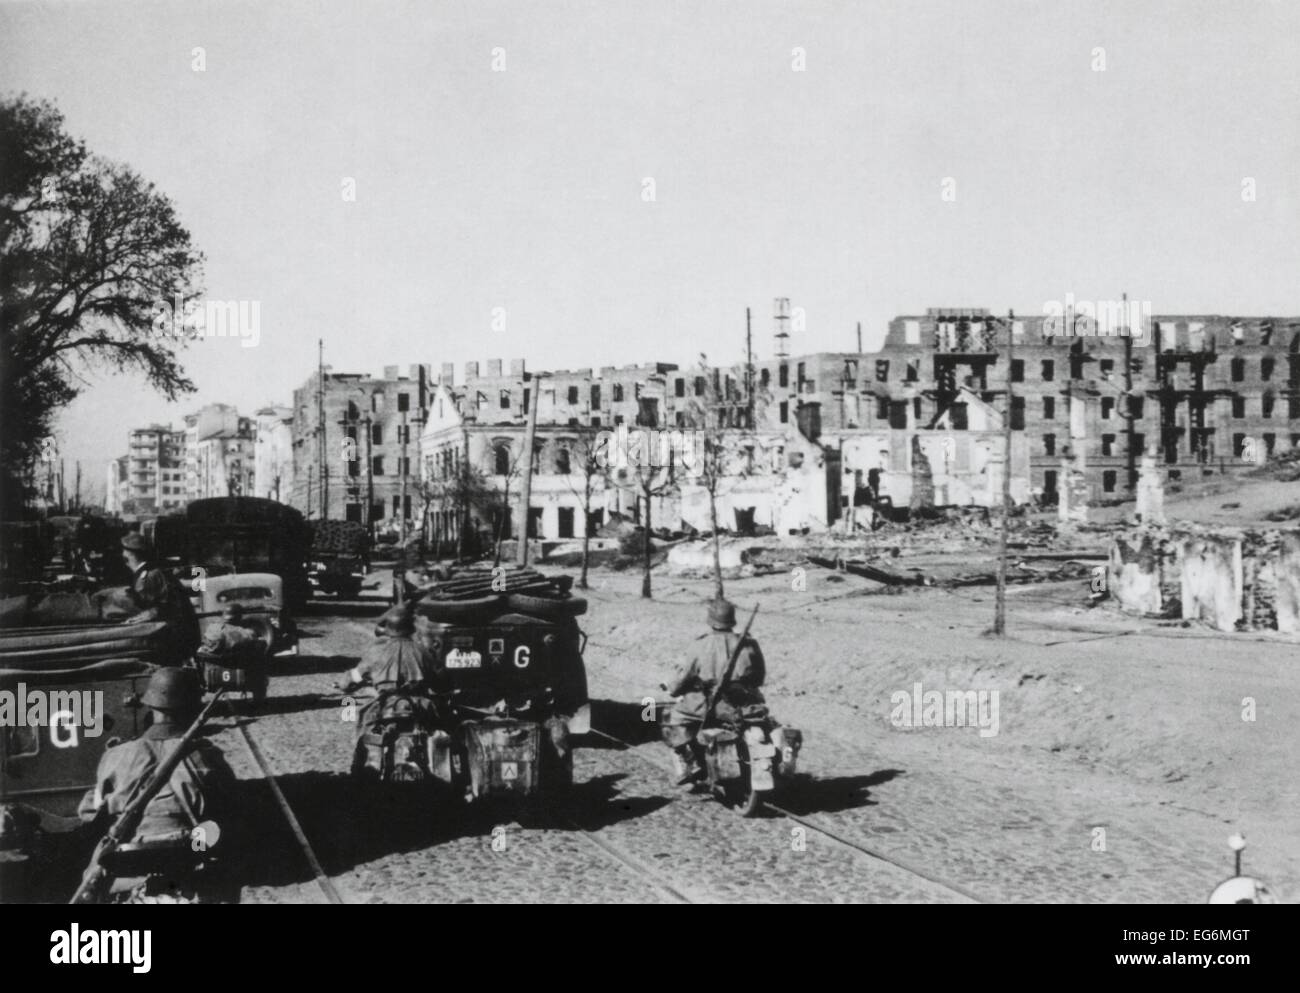 German Center army captured Minsk on June 25, 1941, in Operation Barbarossa. The Soviet (Russian) city's population of 300,000 Stock Photo